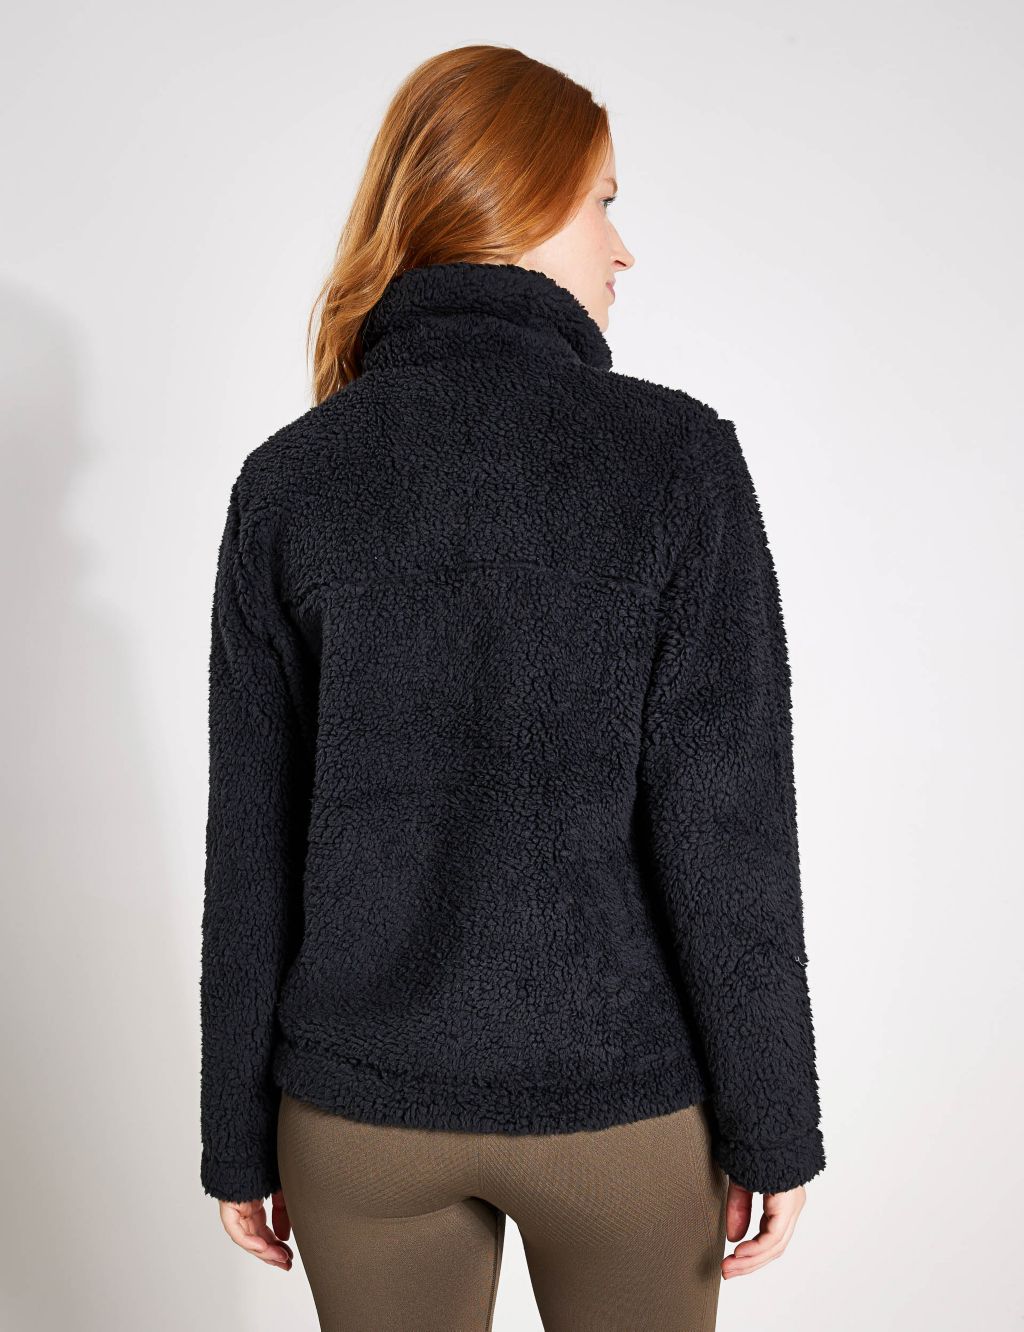 Winter Pass Funnel Neck Jacket image 3